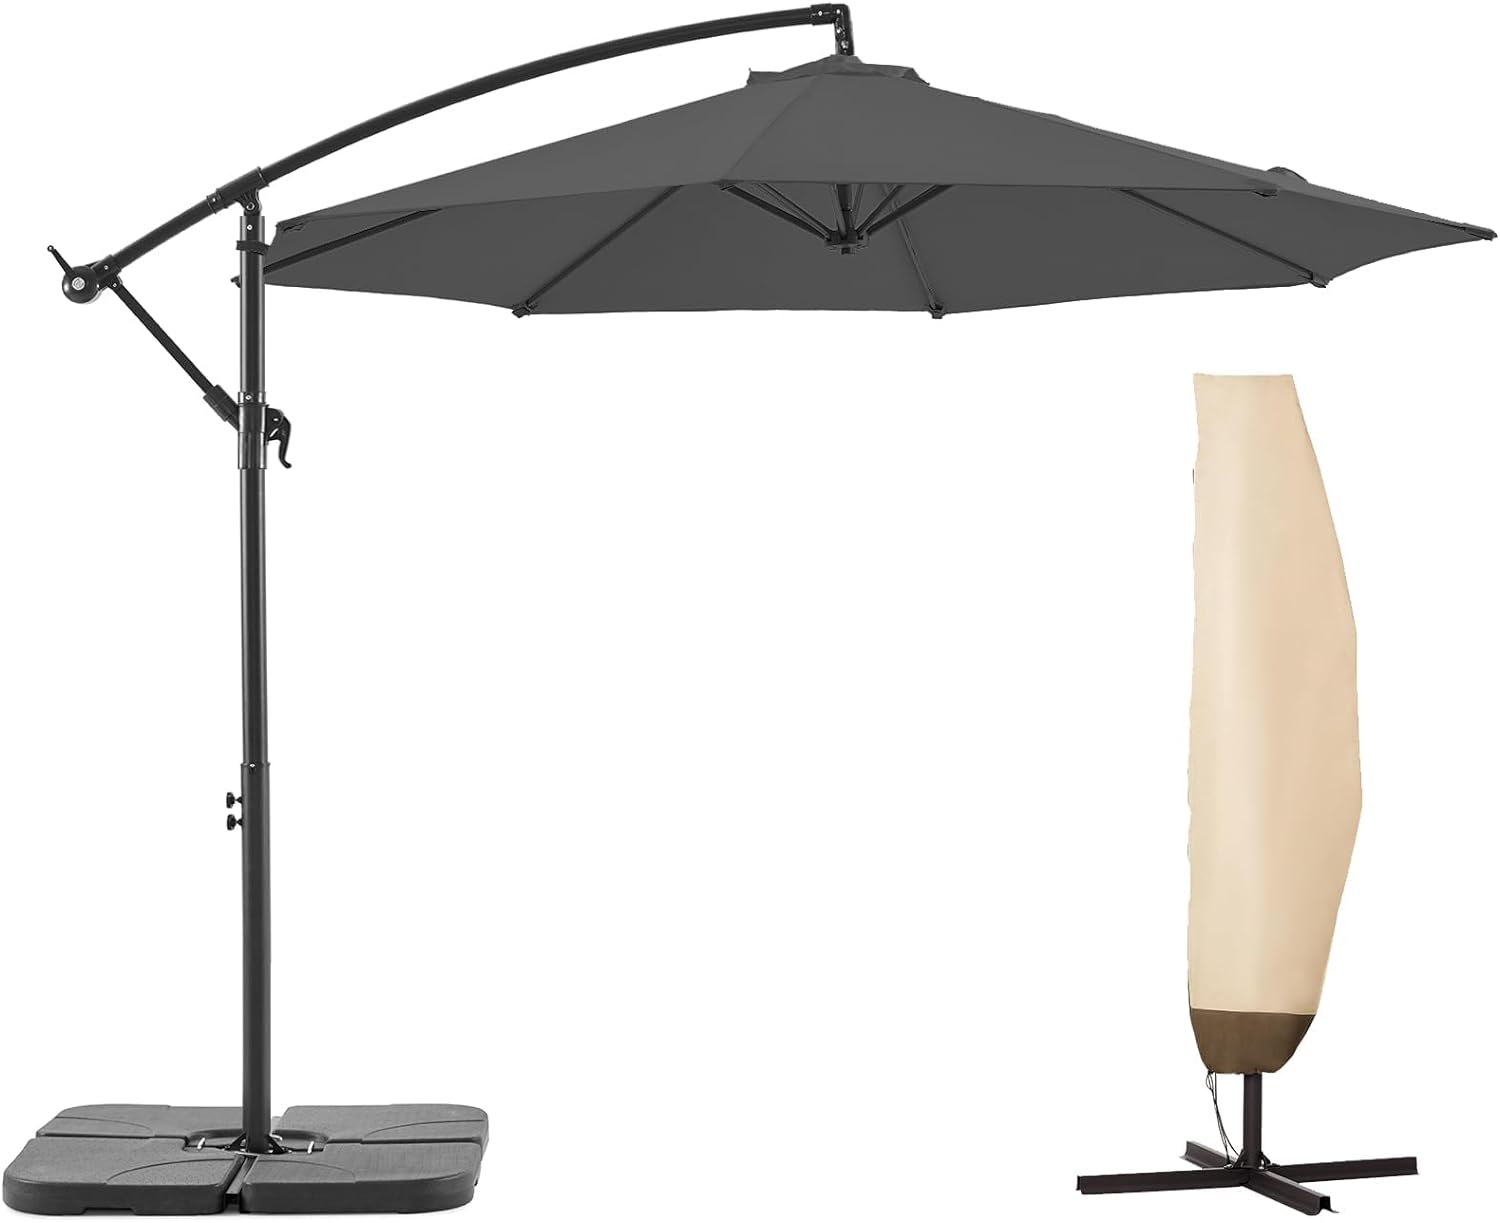 BLUU BANYAN 10 FT Patio Offset Umbrella Cantilever Hanging Umbrellas, 24 Month Fade Resistance & Water-repellent UV Protection, Crank & Cross Base (Grey, 10 FT WITH 600D COVER)